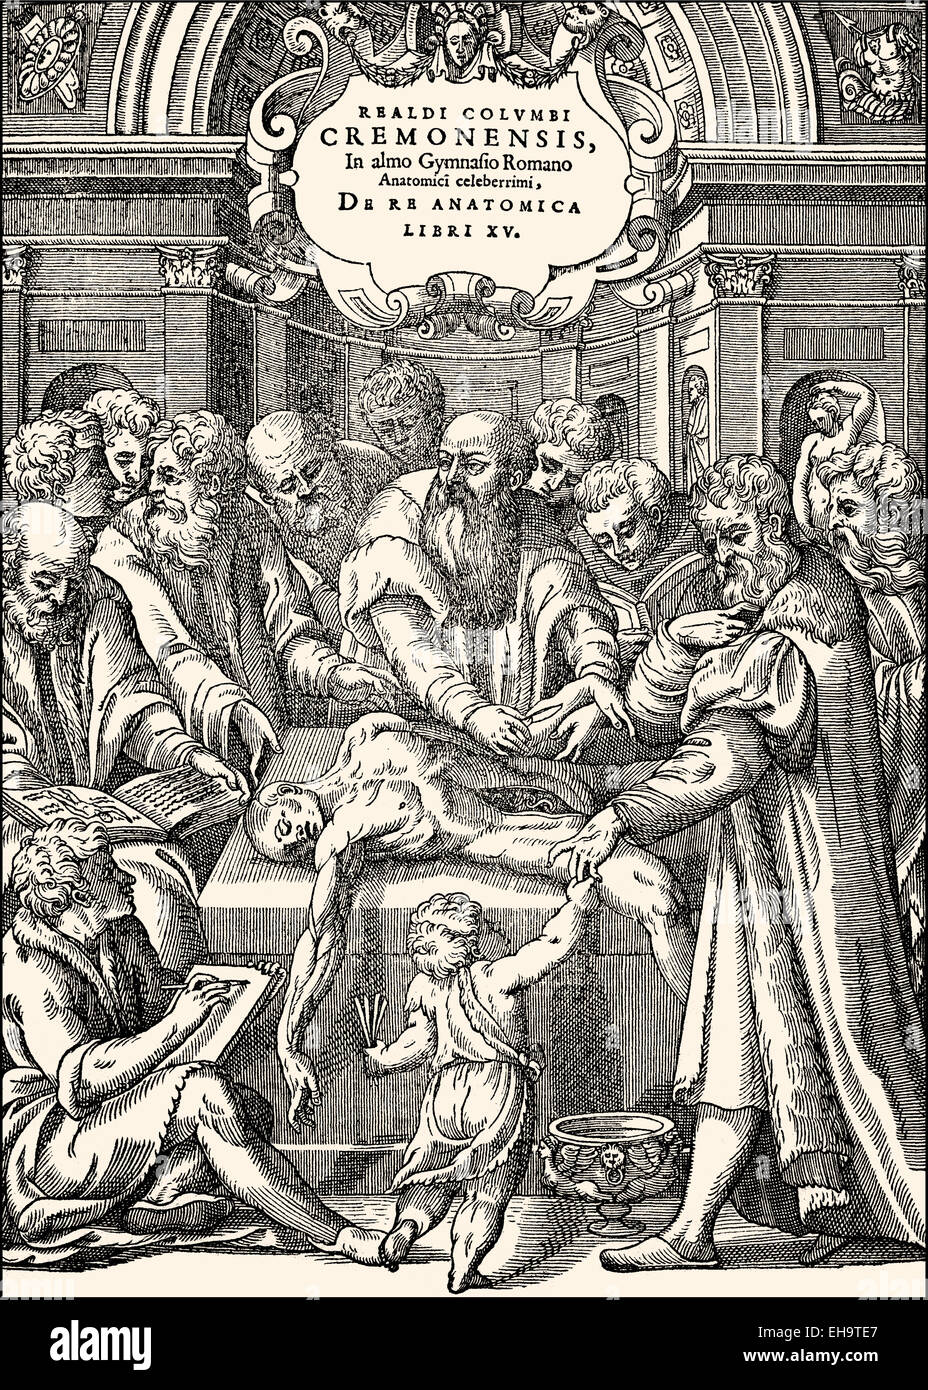 Title page from 1559, Realdo Colombo, anatomy lessons in the 16th century, Stock Photo